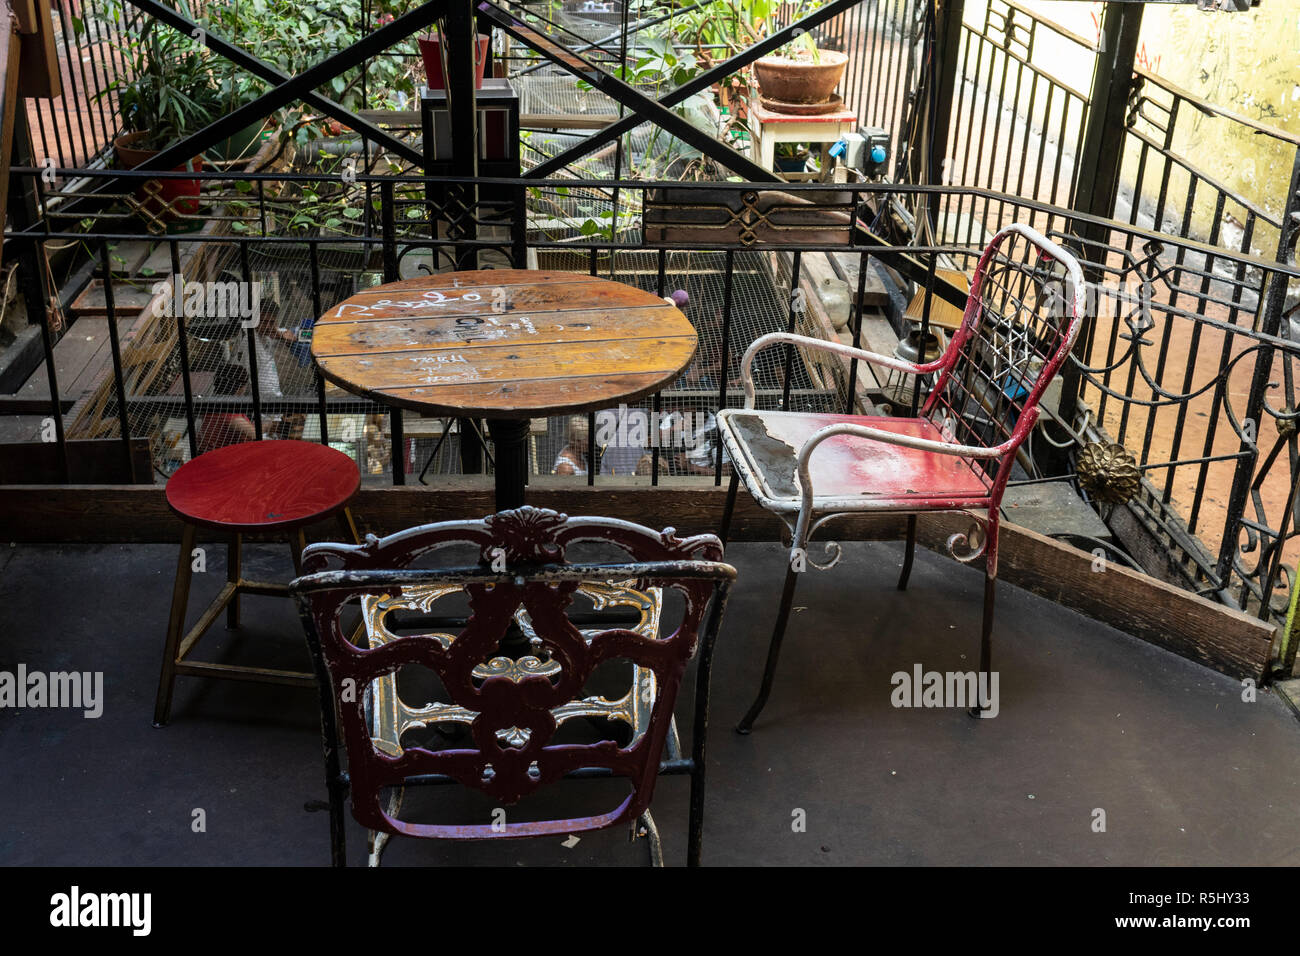 BUDAPEST, HUNGARY - August 12, 2018: Vintage bar furniture on a terrace in Szimpla kert ruin pub, a popular tourist destinations in Hungary. Stock Photo